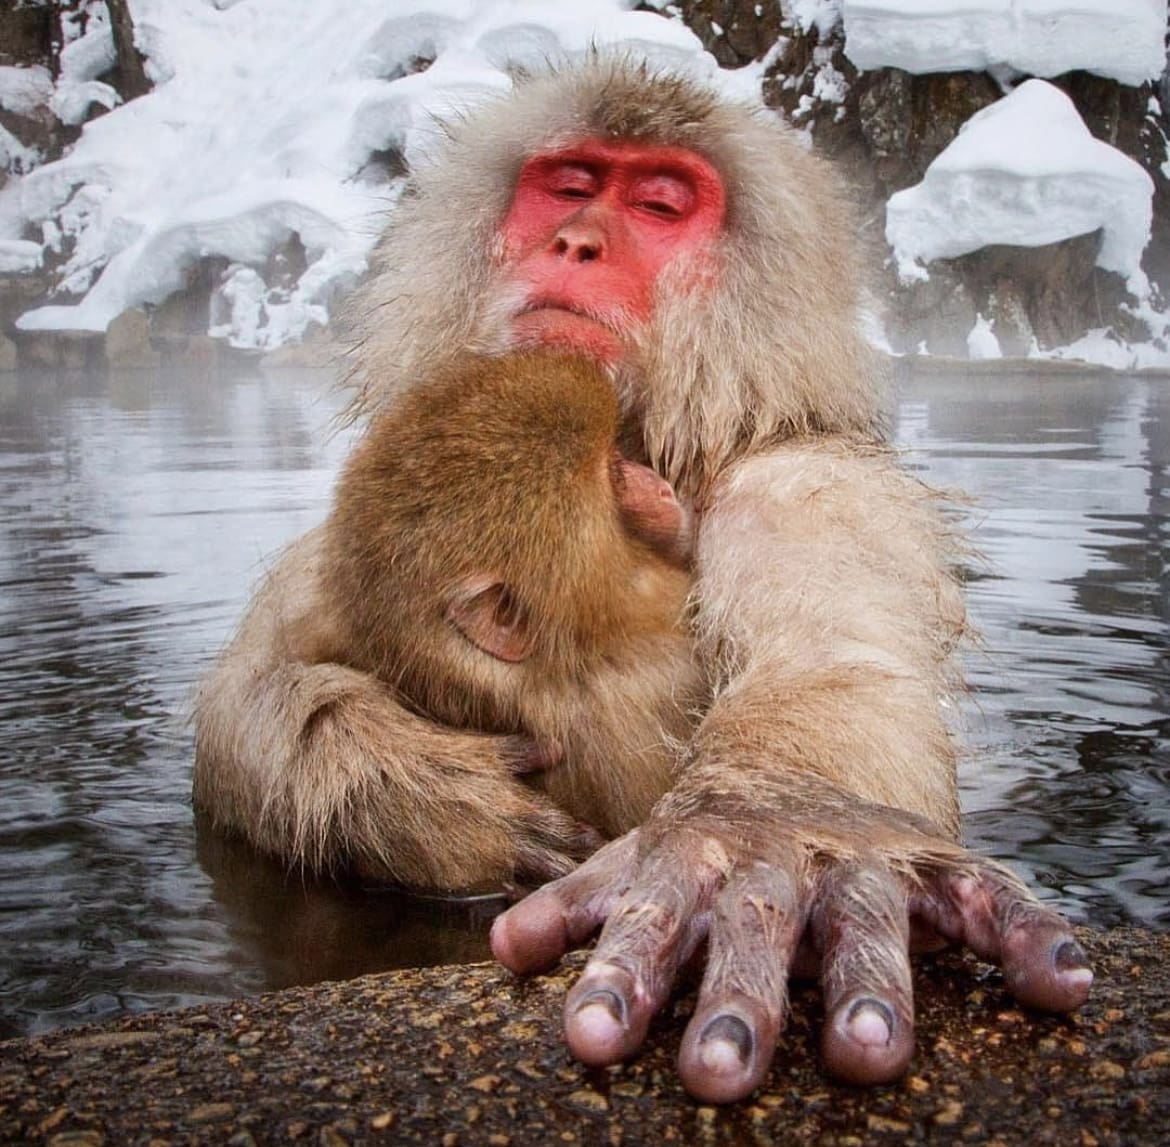 Japanese Macaque in a hot spring